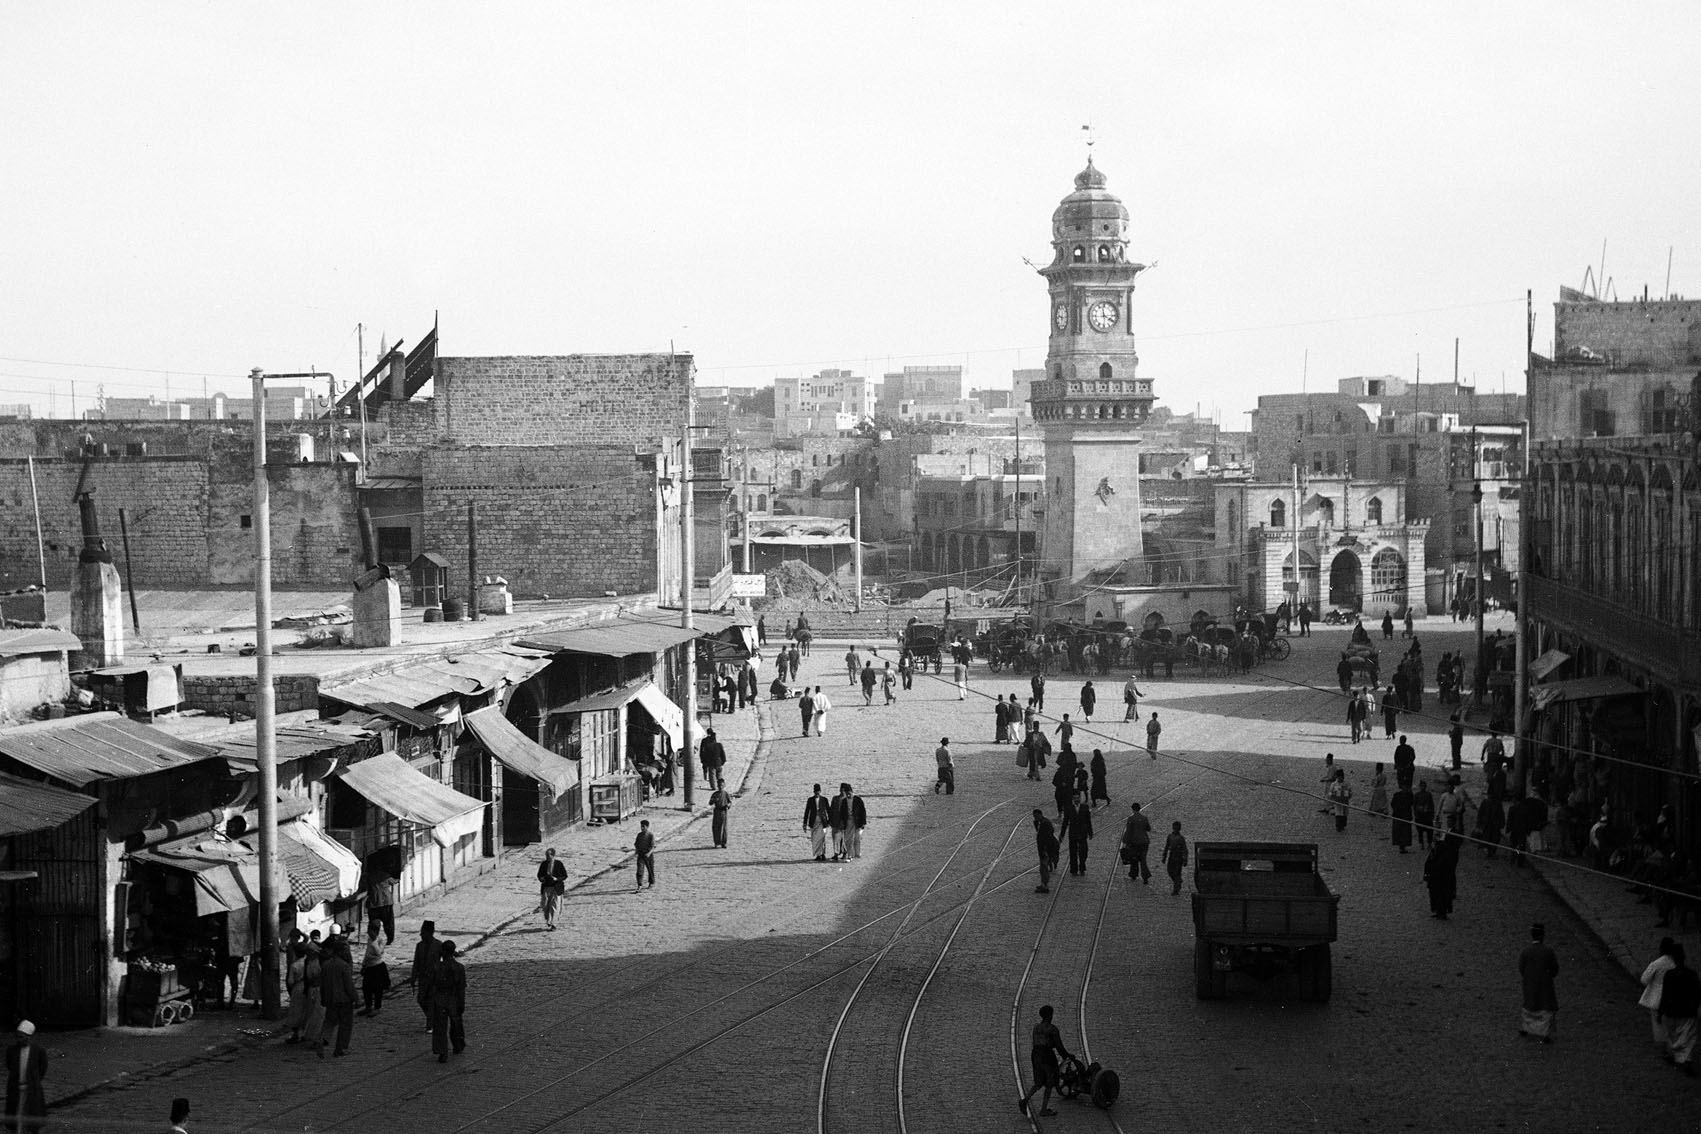 Section of public square known as Bab al-Faraj seen in 1937, part of the surrounding fabric of the gate demolished in 1904. Clock tower built in 1898-1899 by the Austrian architect of Aleppo city Charles Chartier with the help of the Syrian engineer Bakr Sidqi, under the Ottoman ruler of Aleppo; wāli Raif Pasha